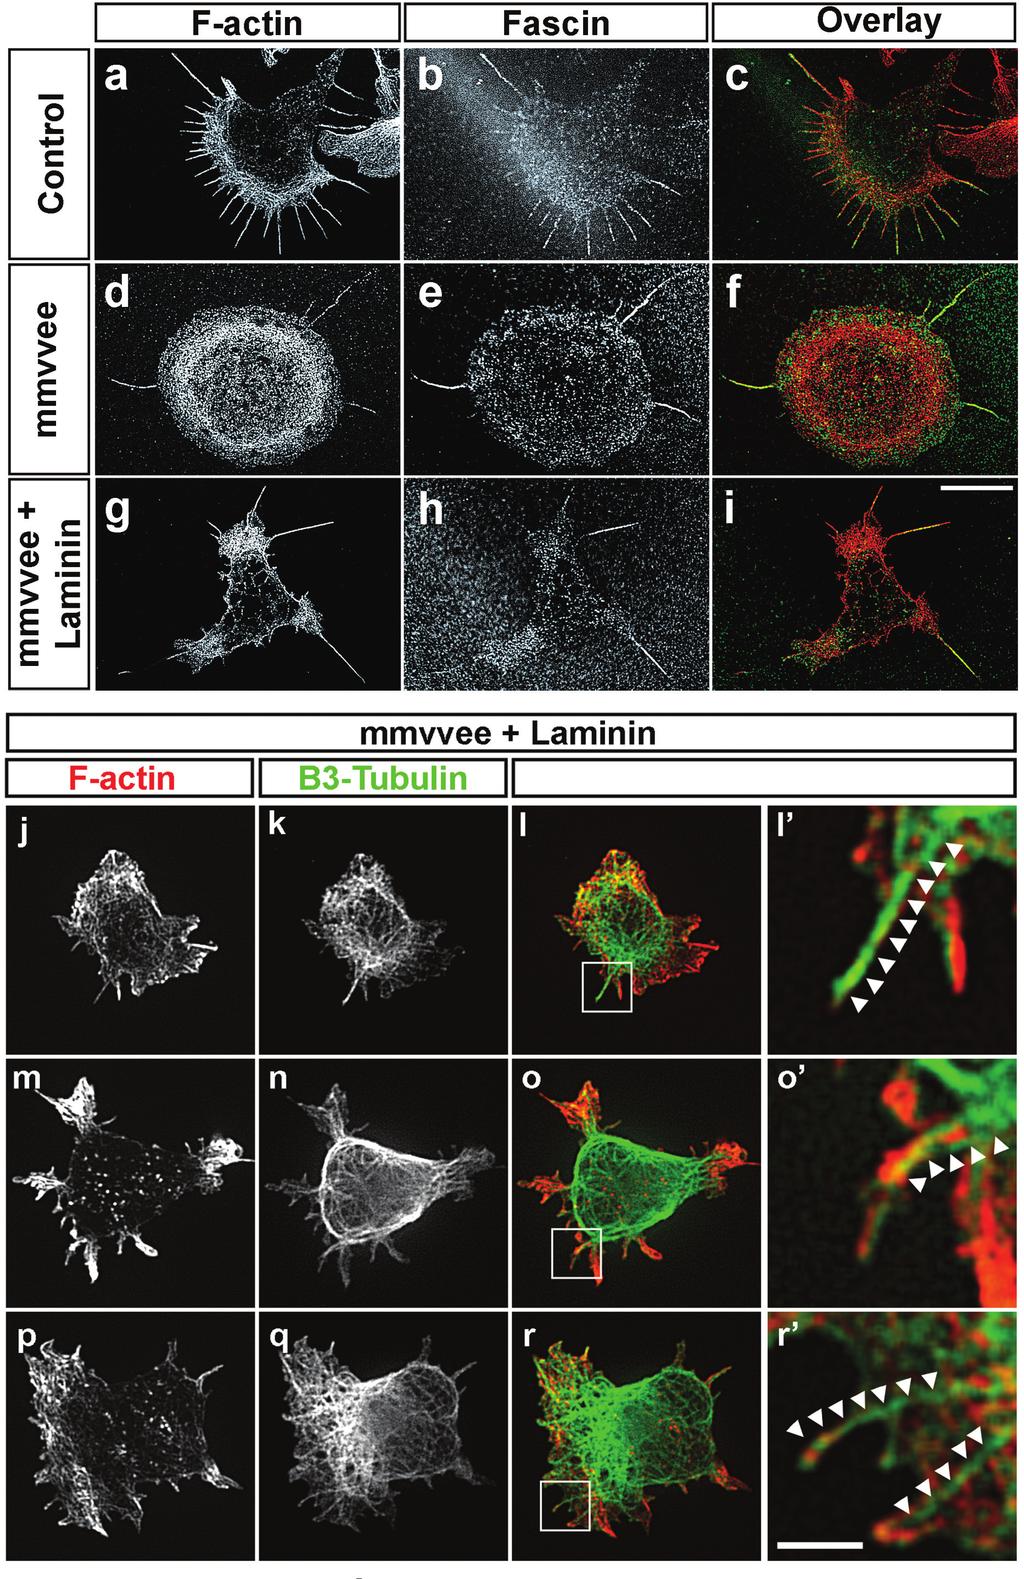 S U P P L E M E N TA R Y I N F O R M AT I O N Figure S4. Filopodia and actin-rich filopodia-like extensions that form after laminin addition contain fascin and are invaded by microtubules.